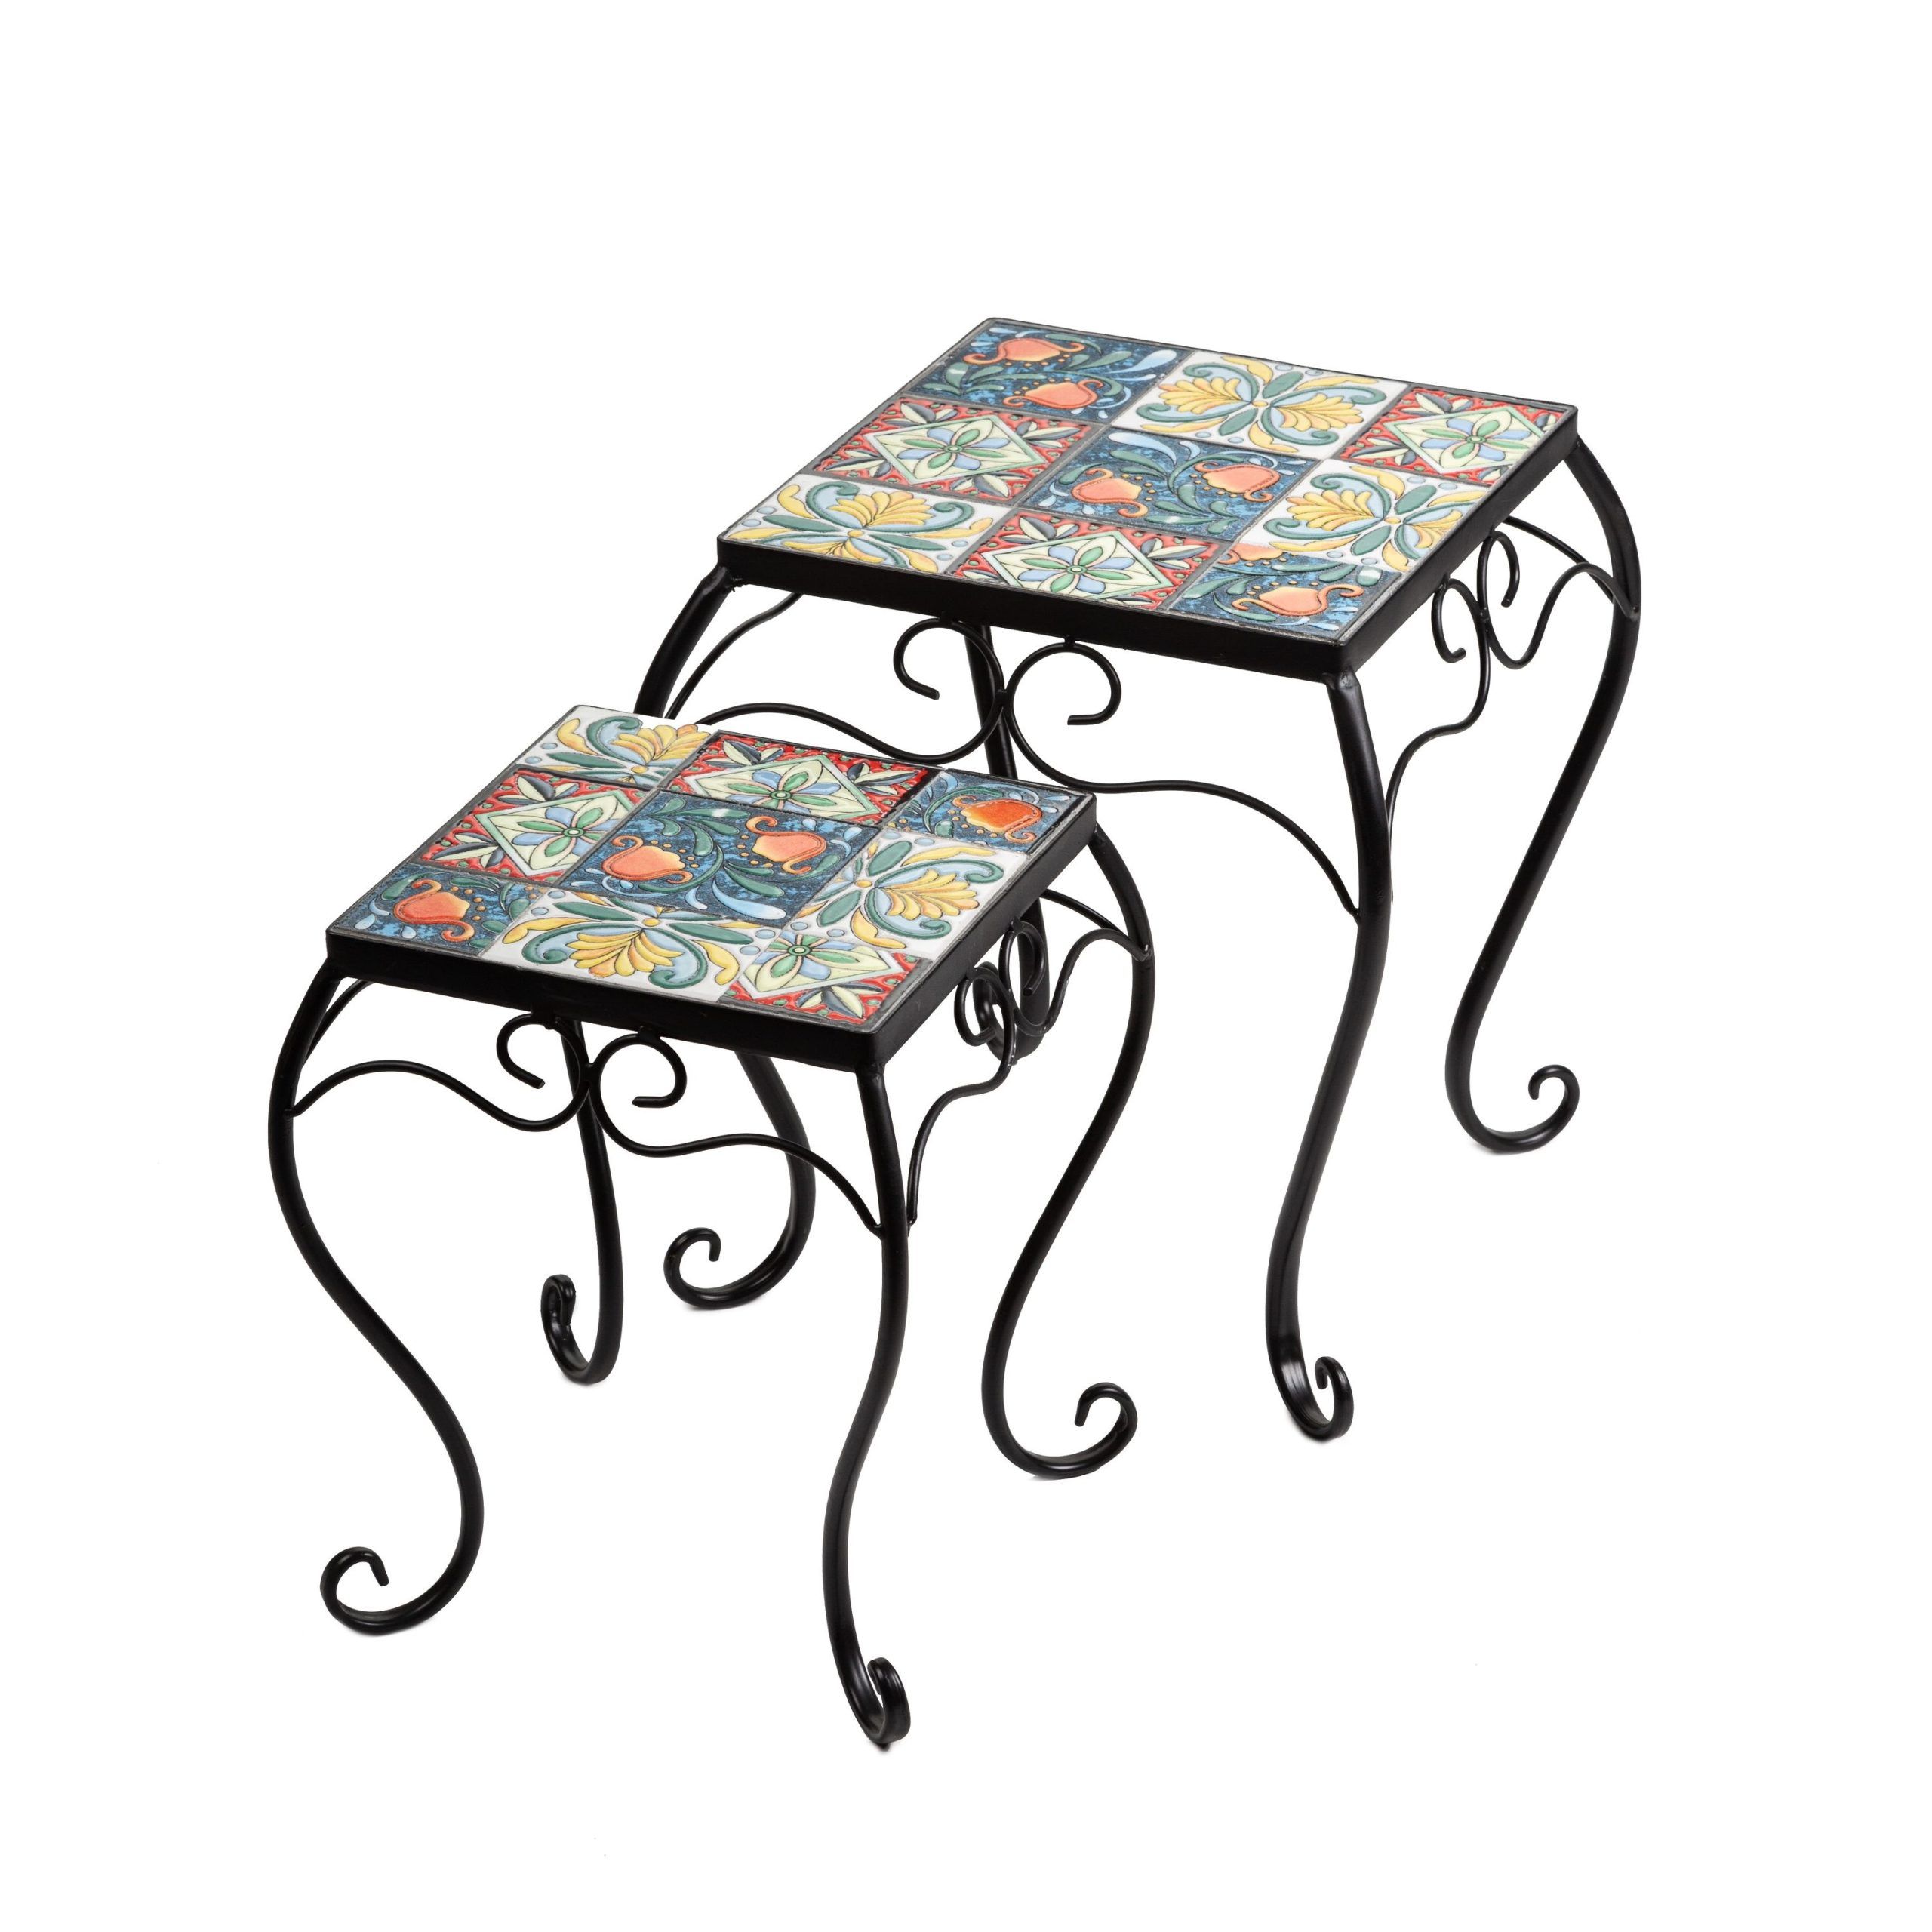 Trendy Home View Design Metal/ceramic Plant Stand W/mosaic Design  (View 9 of 10)